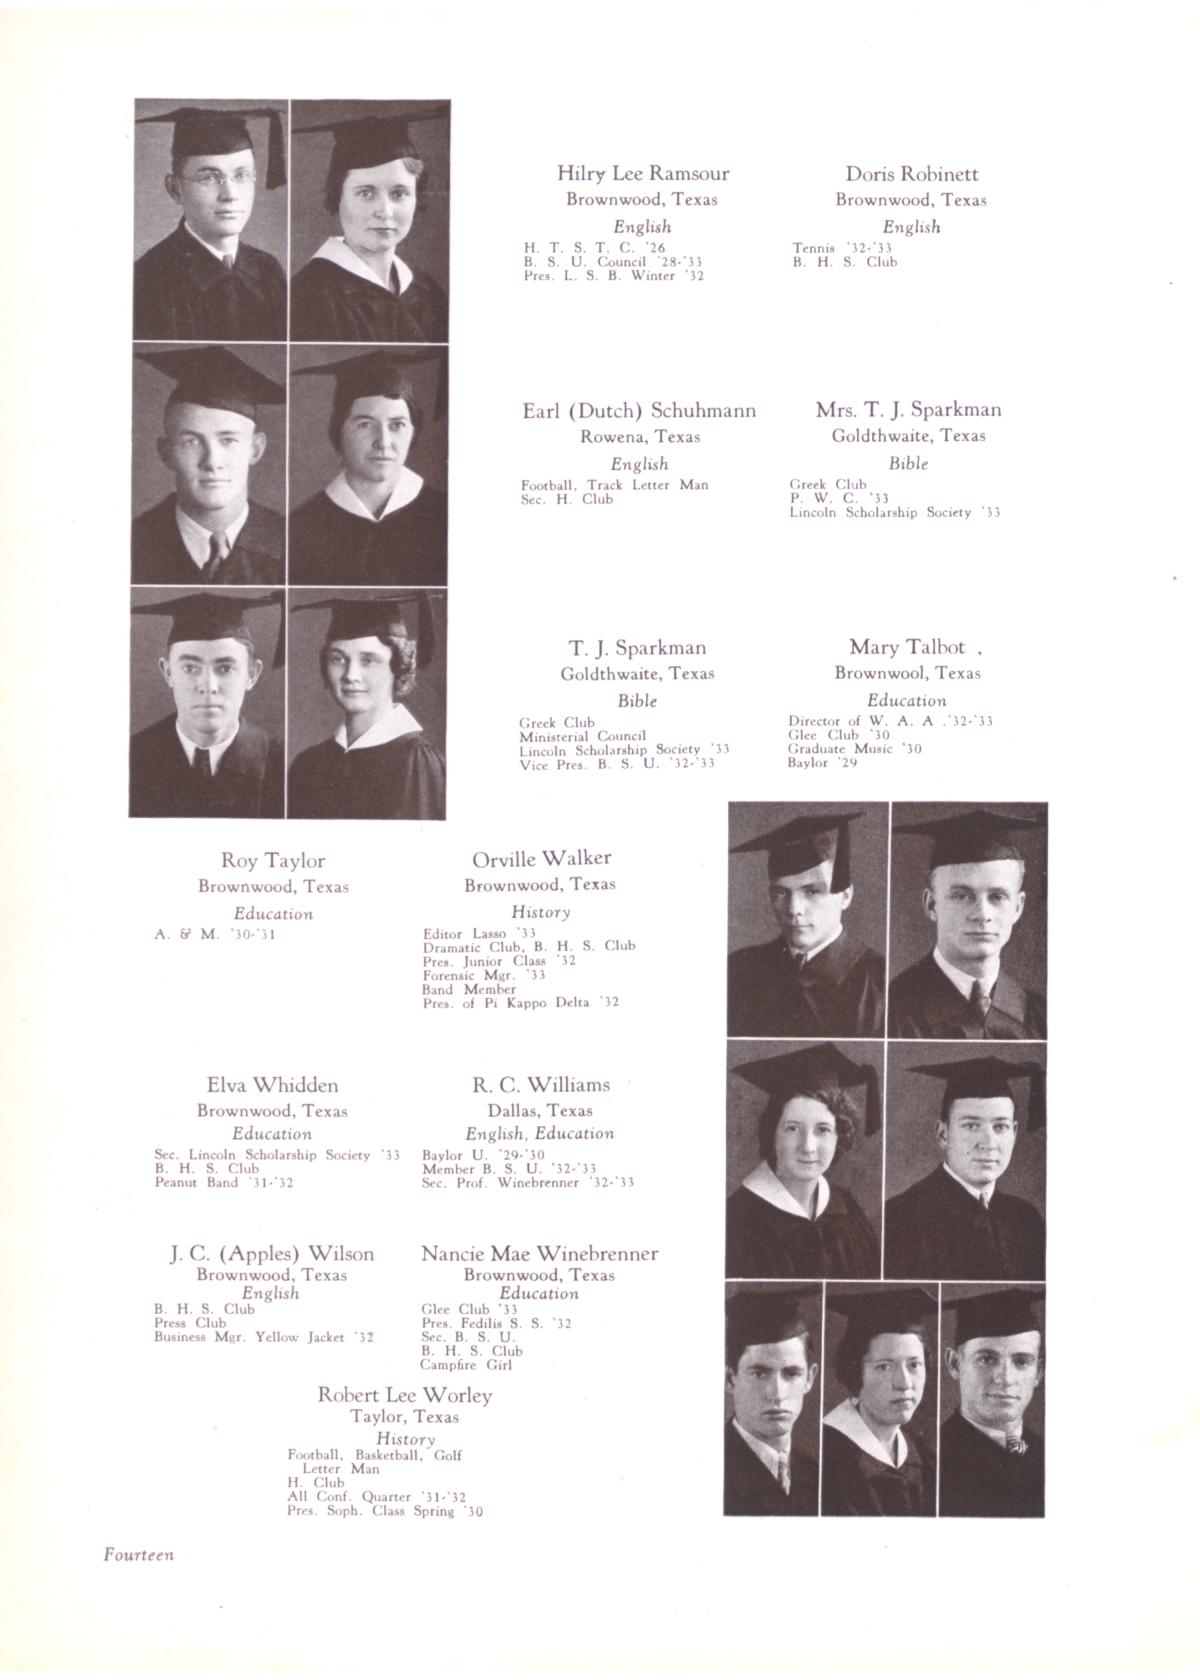 The Lasso, Yearbook of Howard Payne College, 1933
                                                
                                                    14
                                                